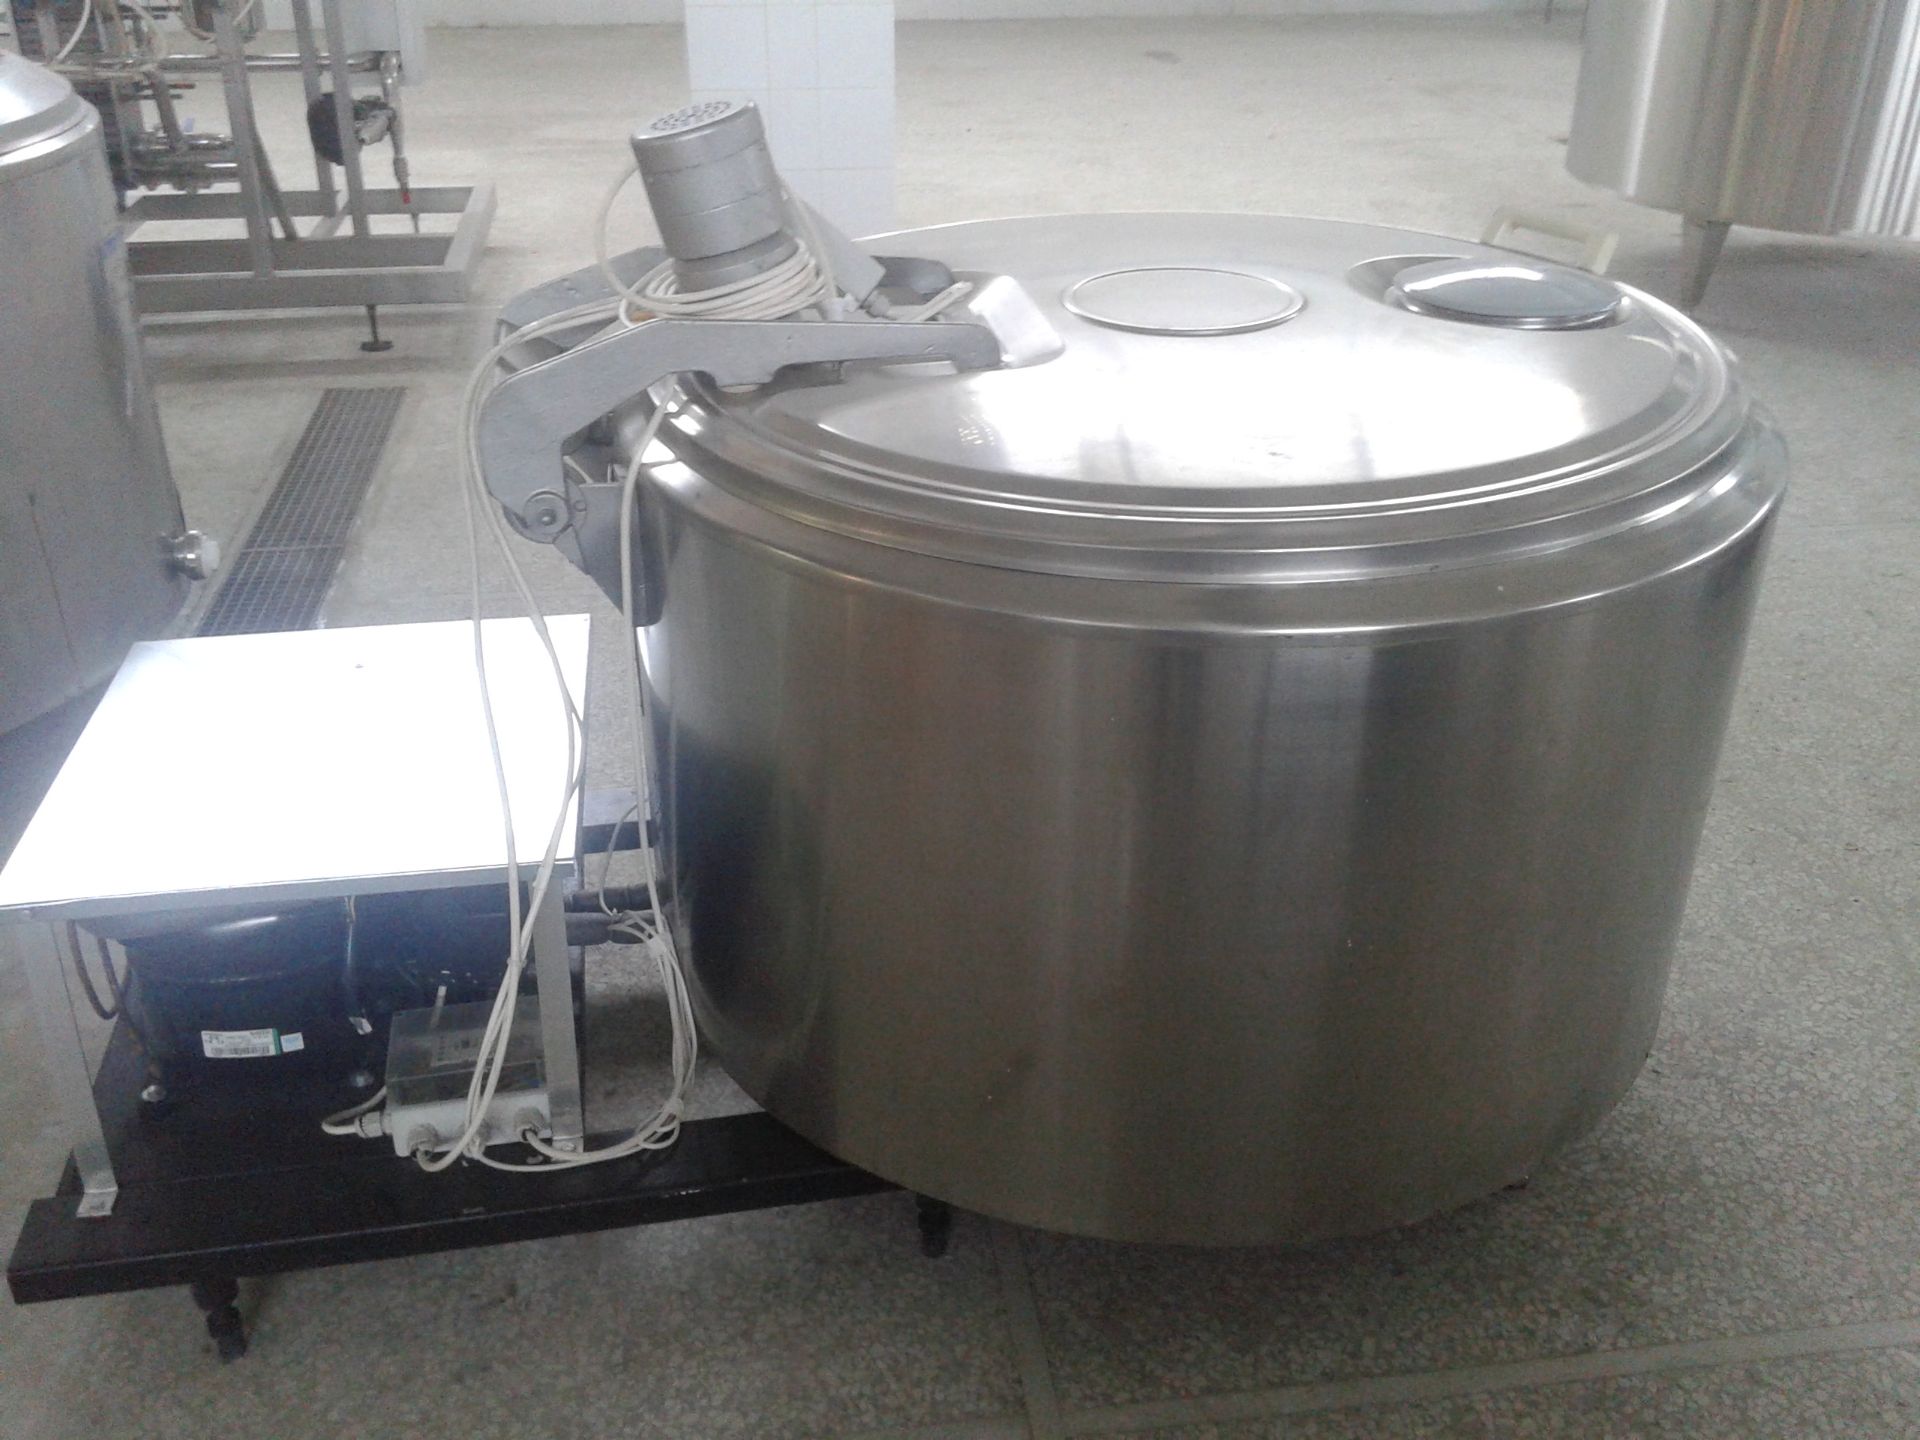 Serap 393 Liter Milk Cooling Tank, Model 550, Equipped with Top Mount Prop Agitation, On-Board